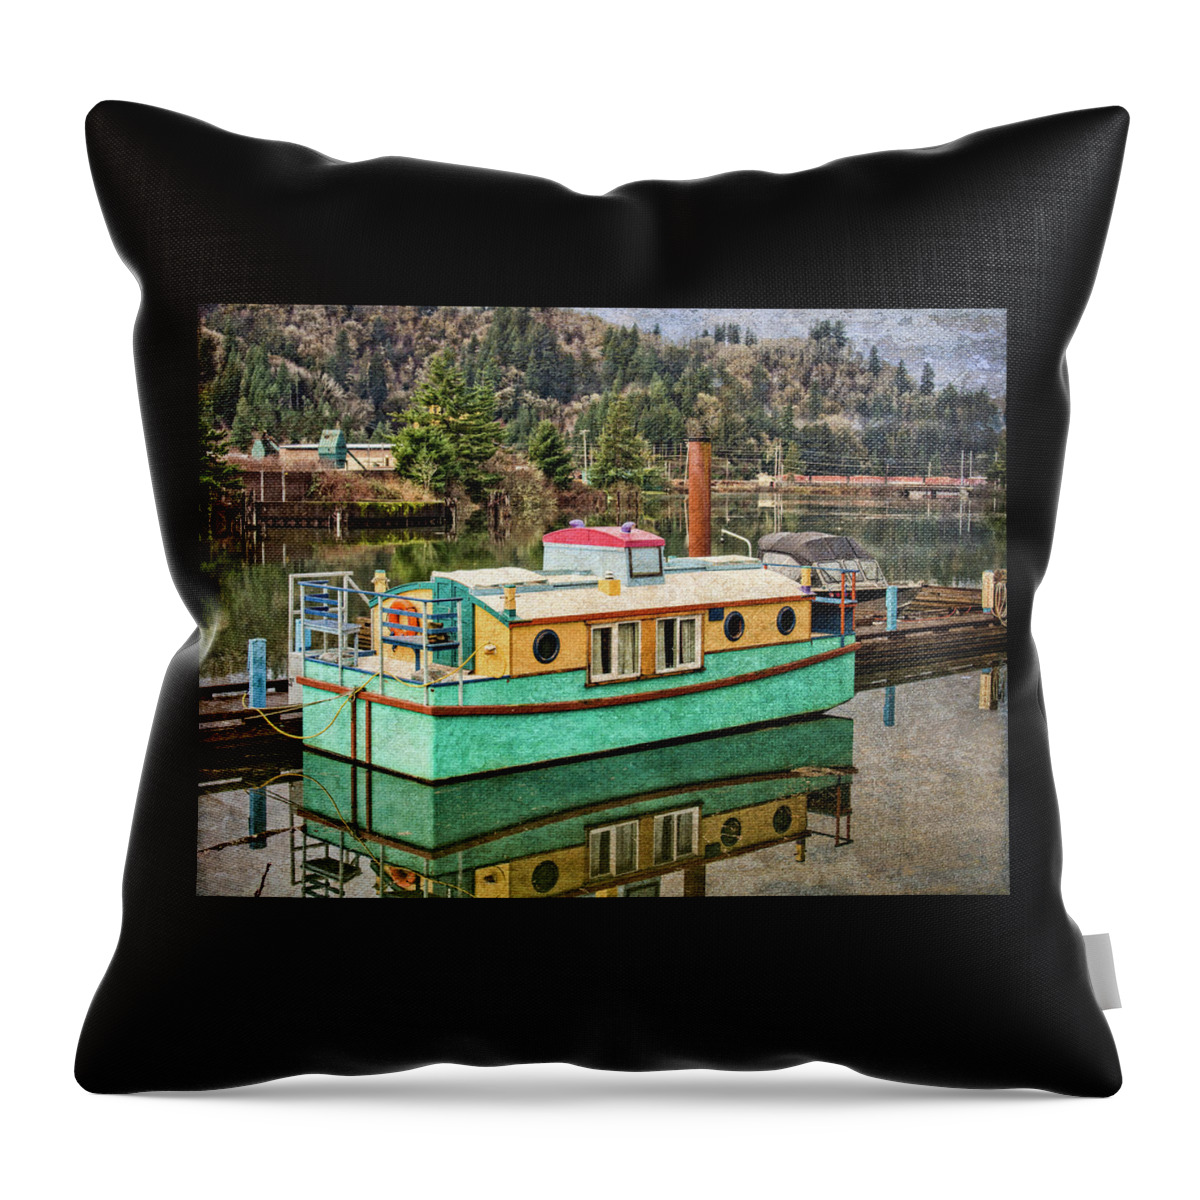 Showboat Throw Pillow featuring the photograph Toledo Showboat by Thom Zehrfeld